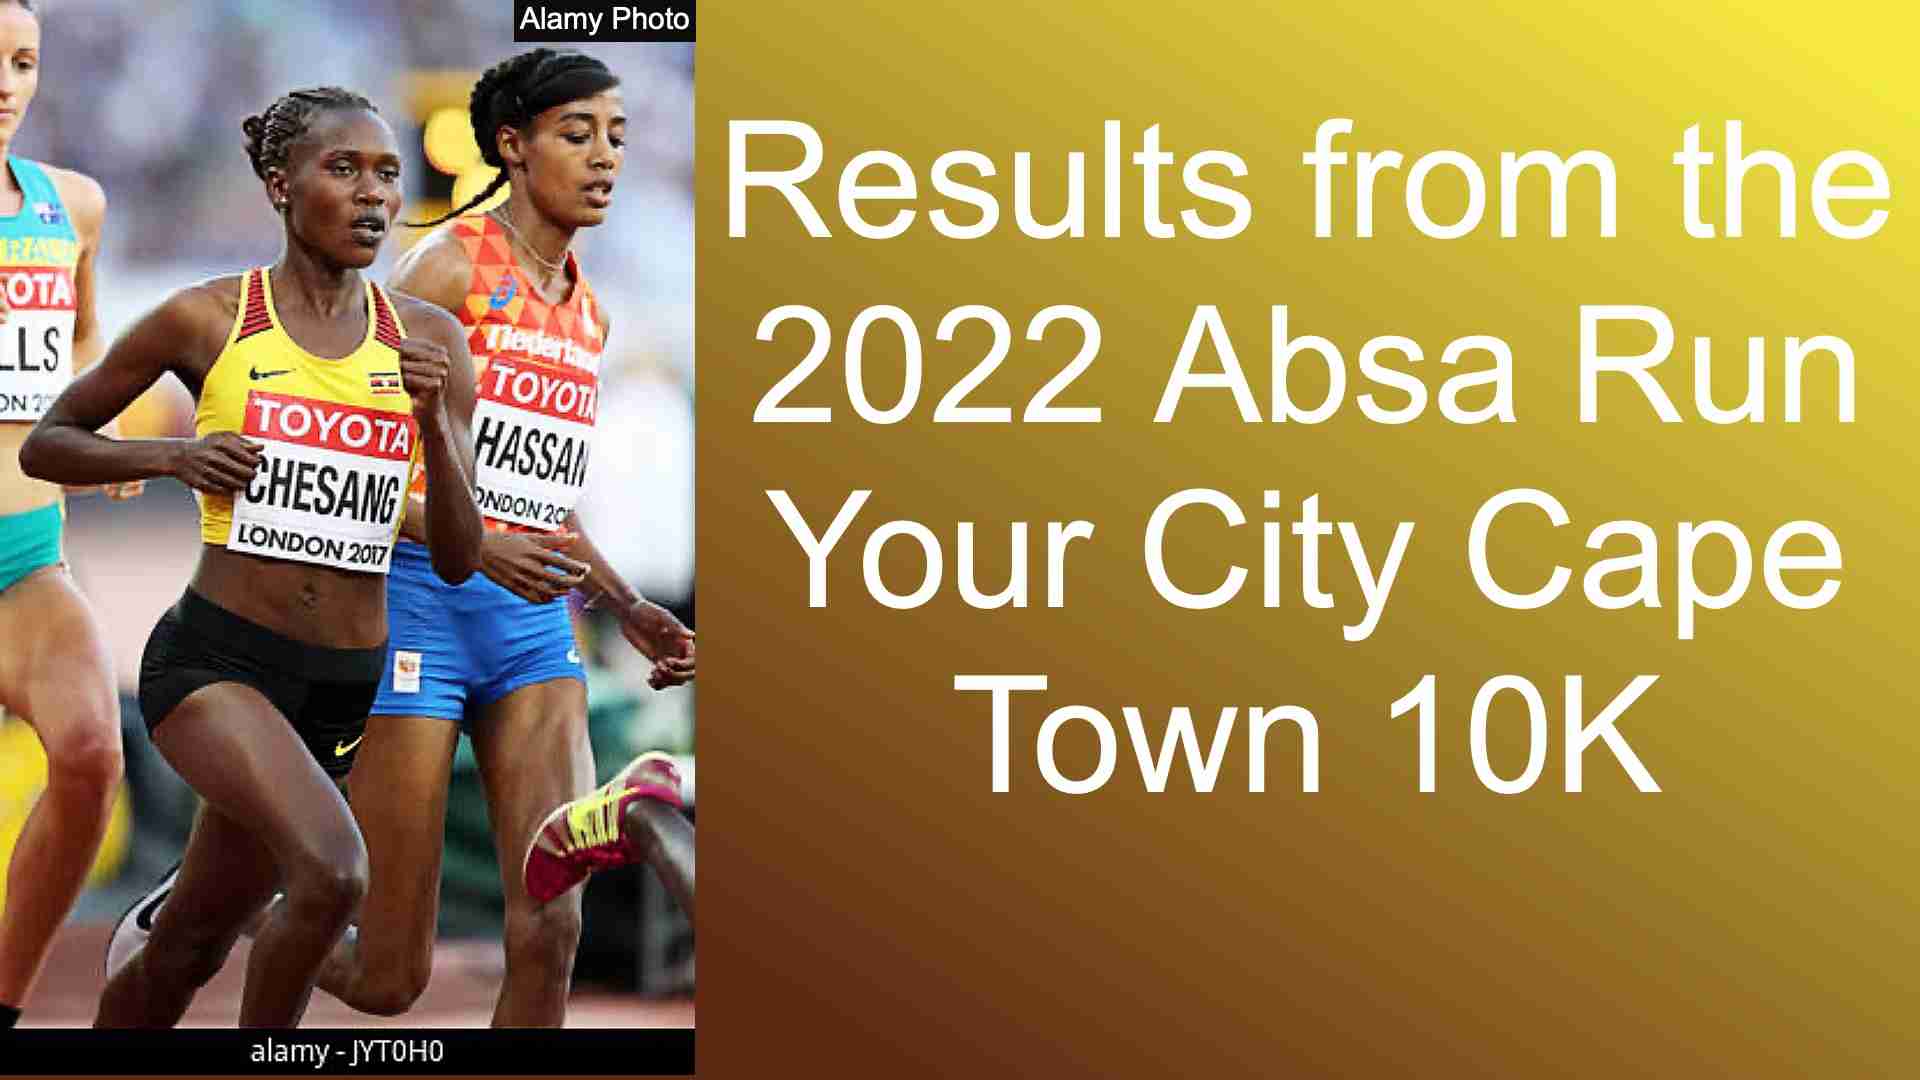 Results from the 2022 Absa Run Your City Cape Town 10K